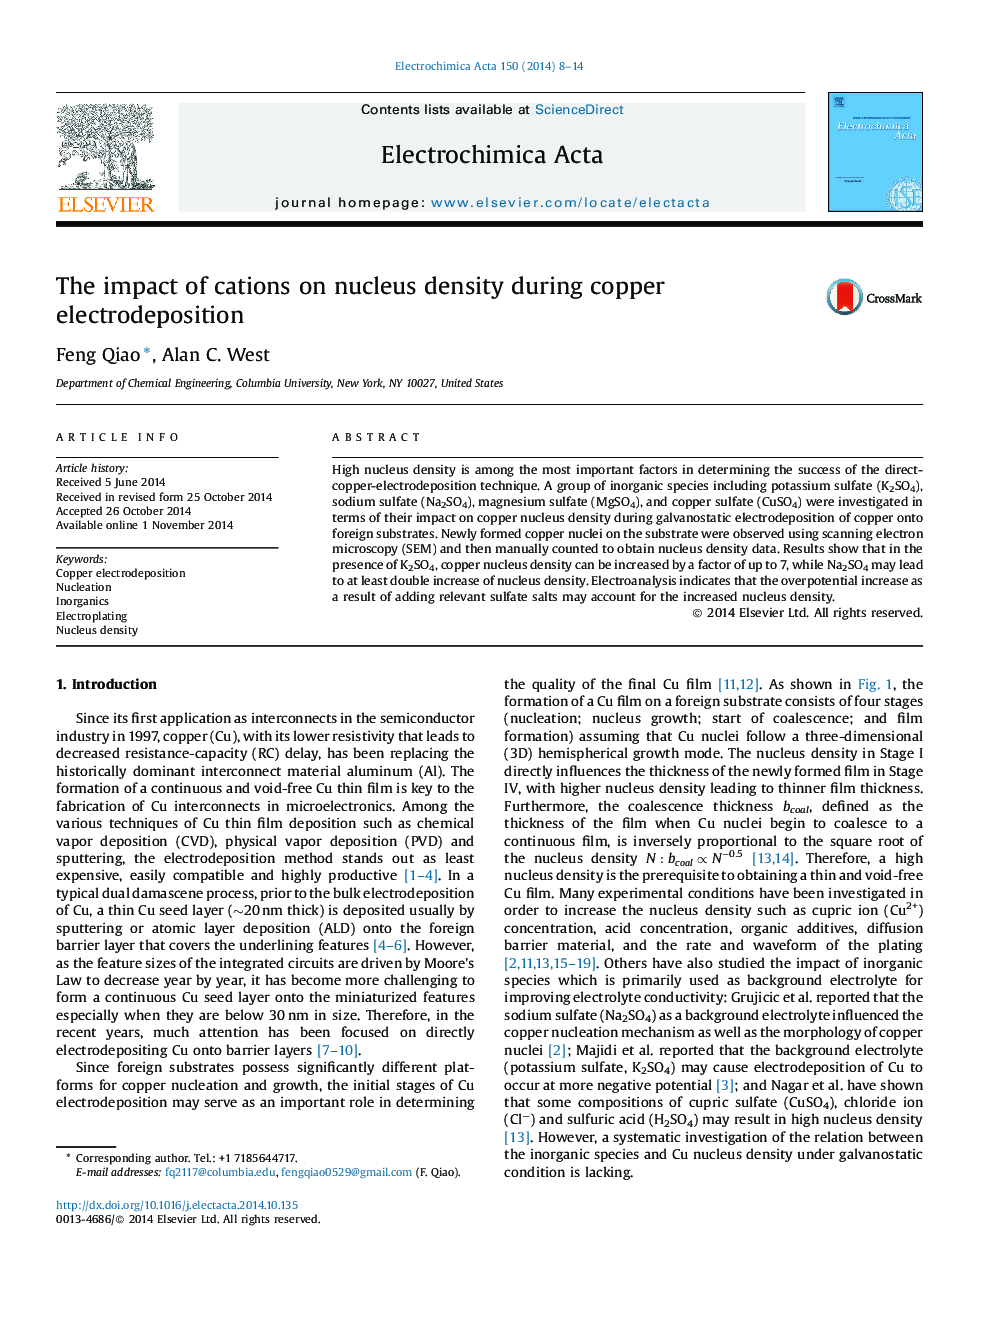 The impact of cations on nucleus density during copper electrodeposition